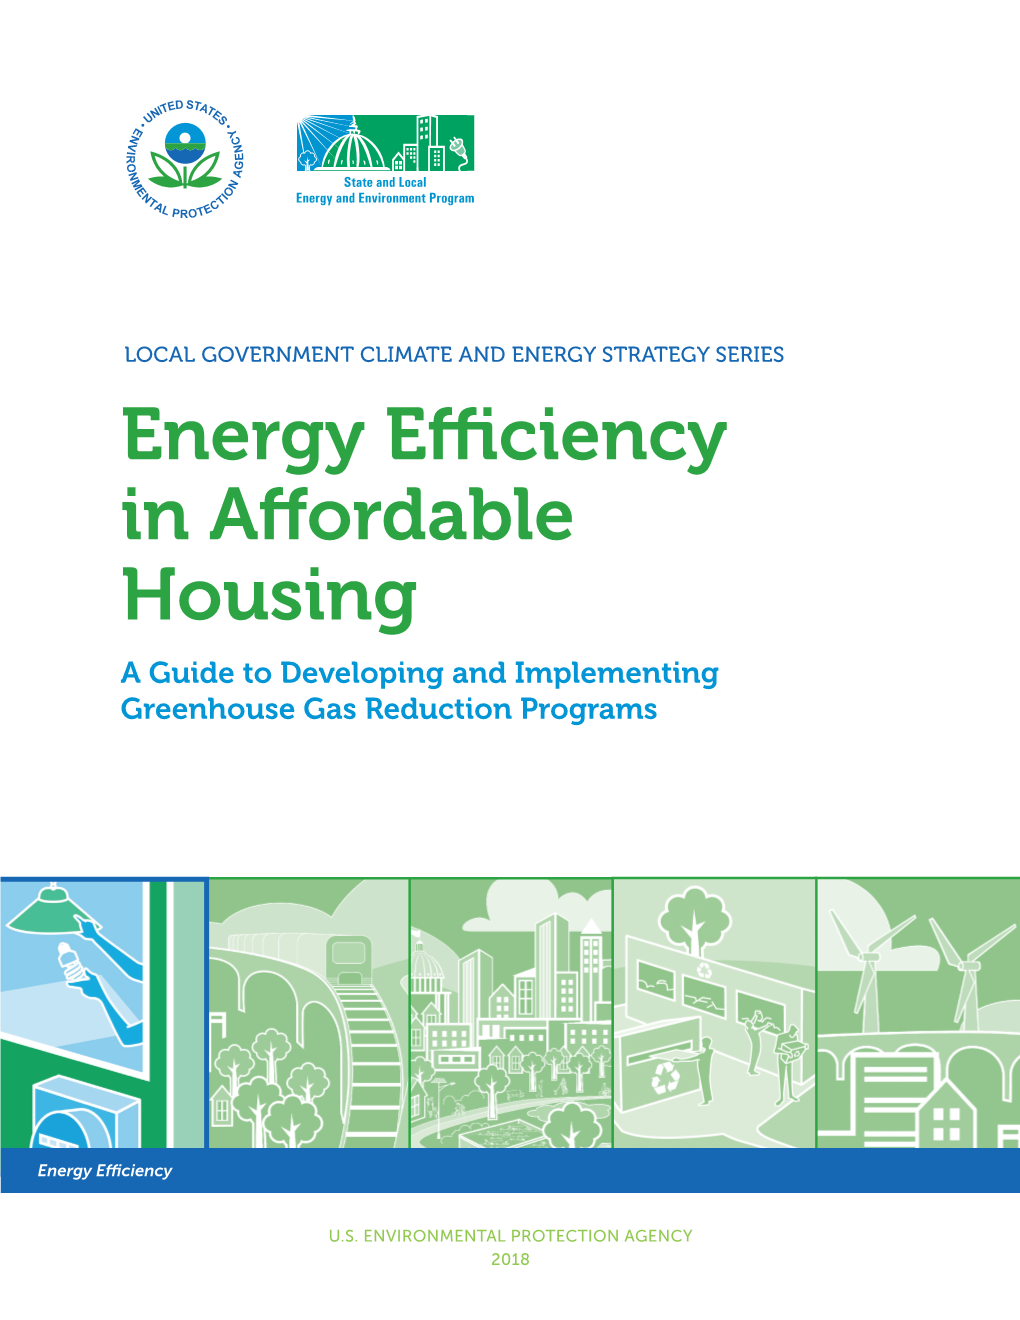 Energy Efficiency in Affordable Housing SOLID WASTE and MATERIALS MANAGEMENT